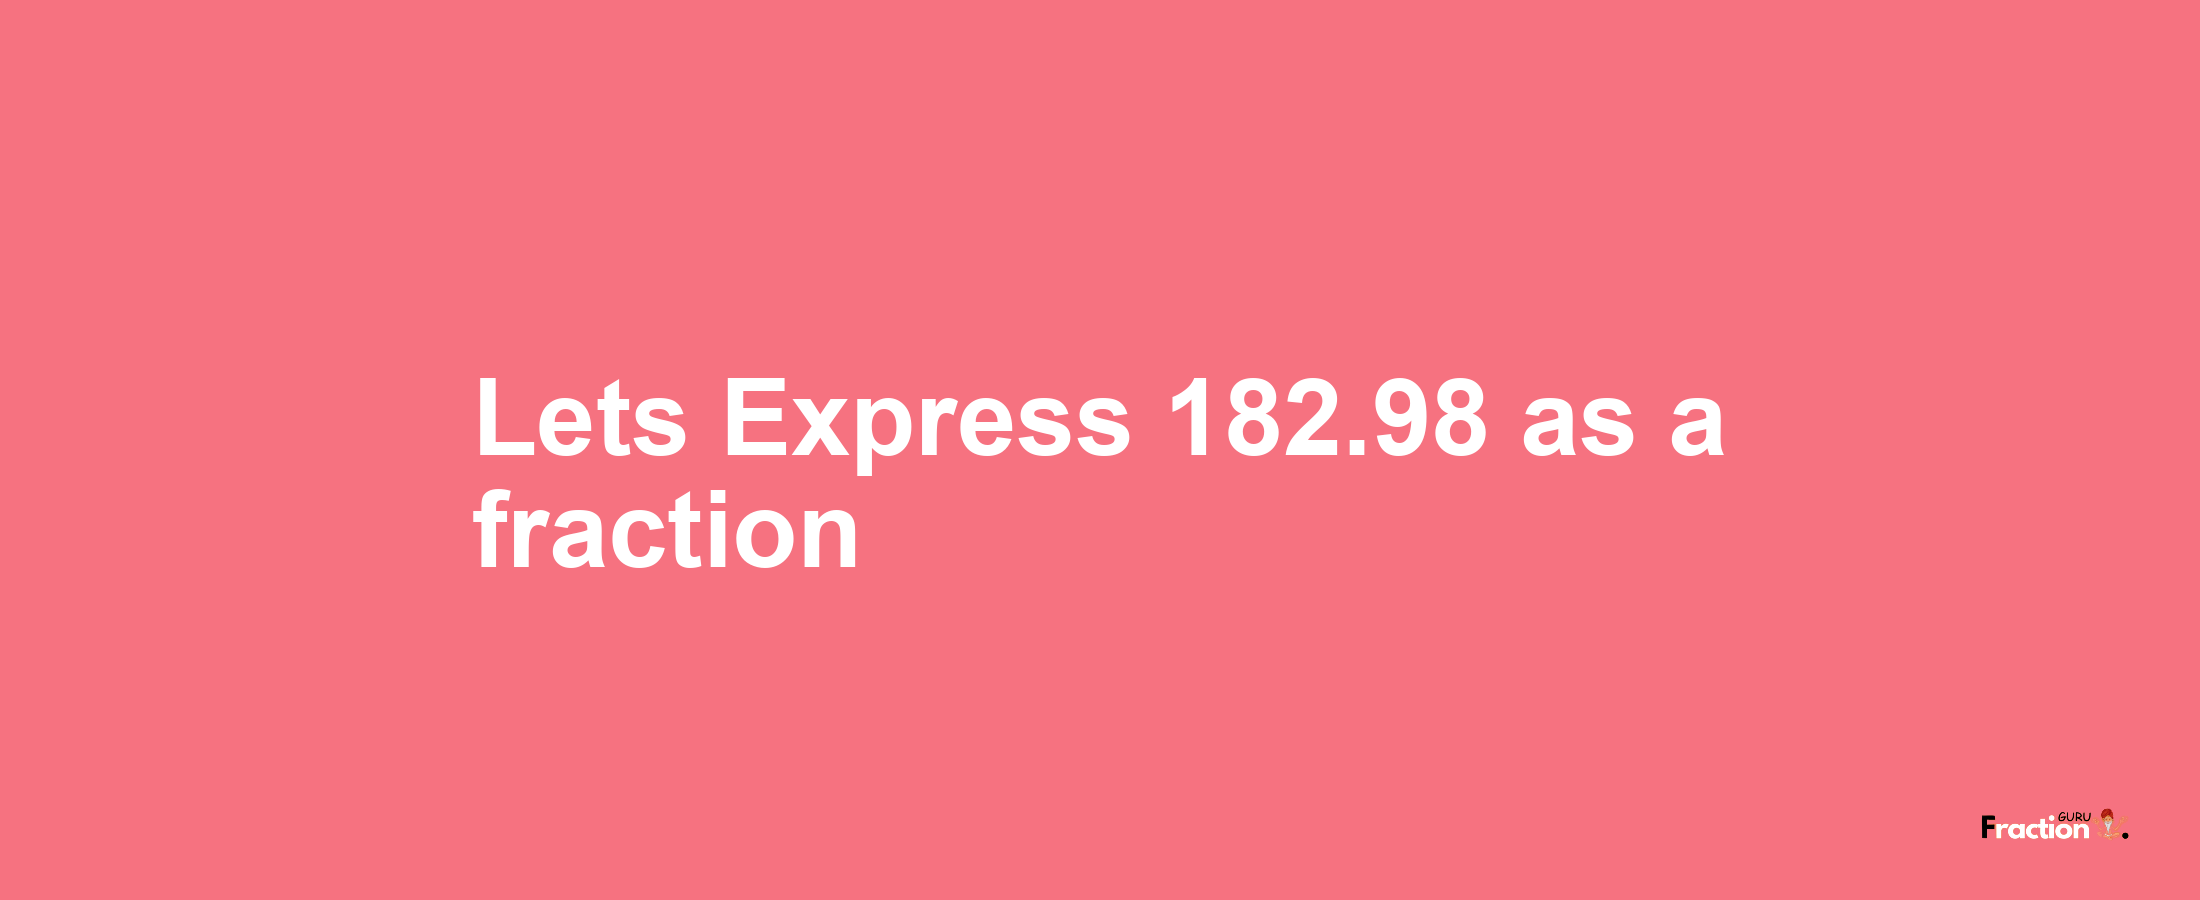 Lets Express 182.98 as afraction